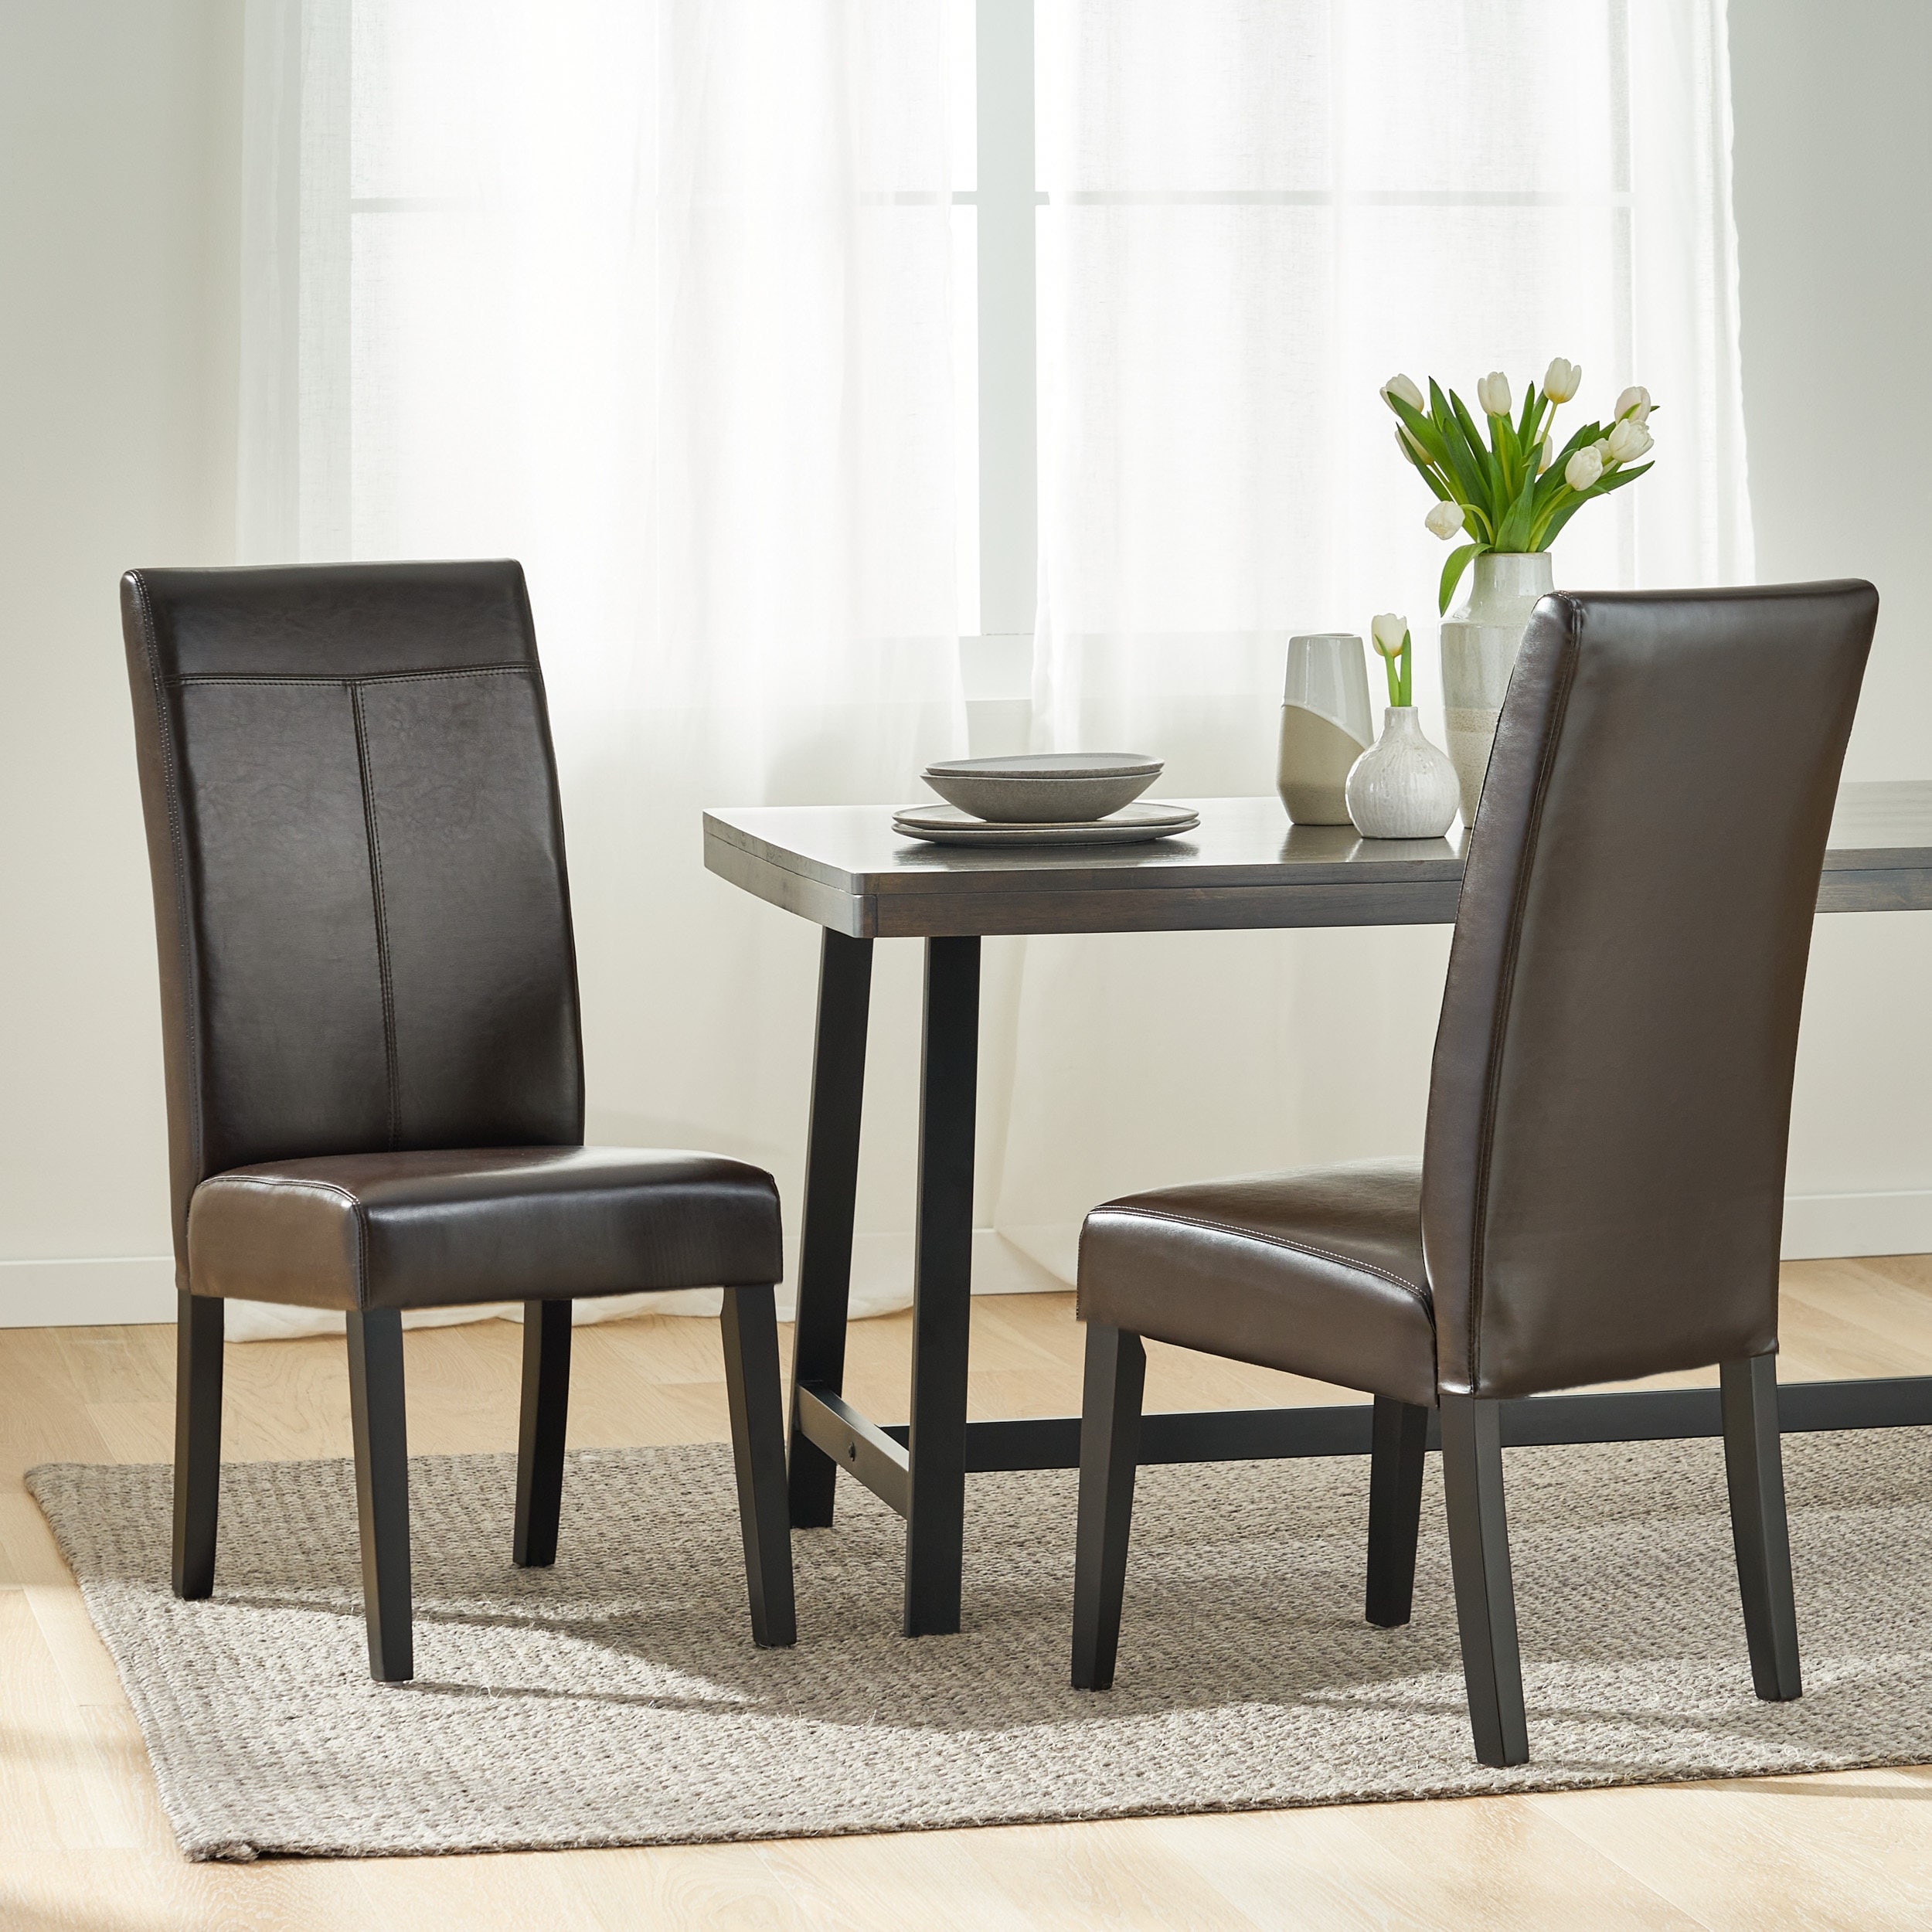 Lissa Chocolate Brown Polyurethane Dining Chair (Set of by Christopher Knight Home On Sale - - 7539134